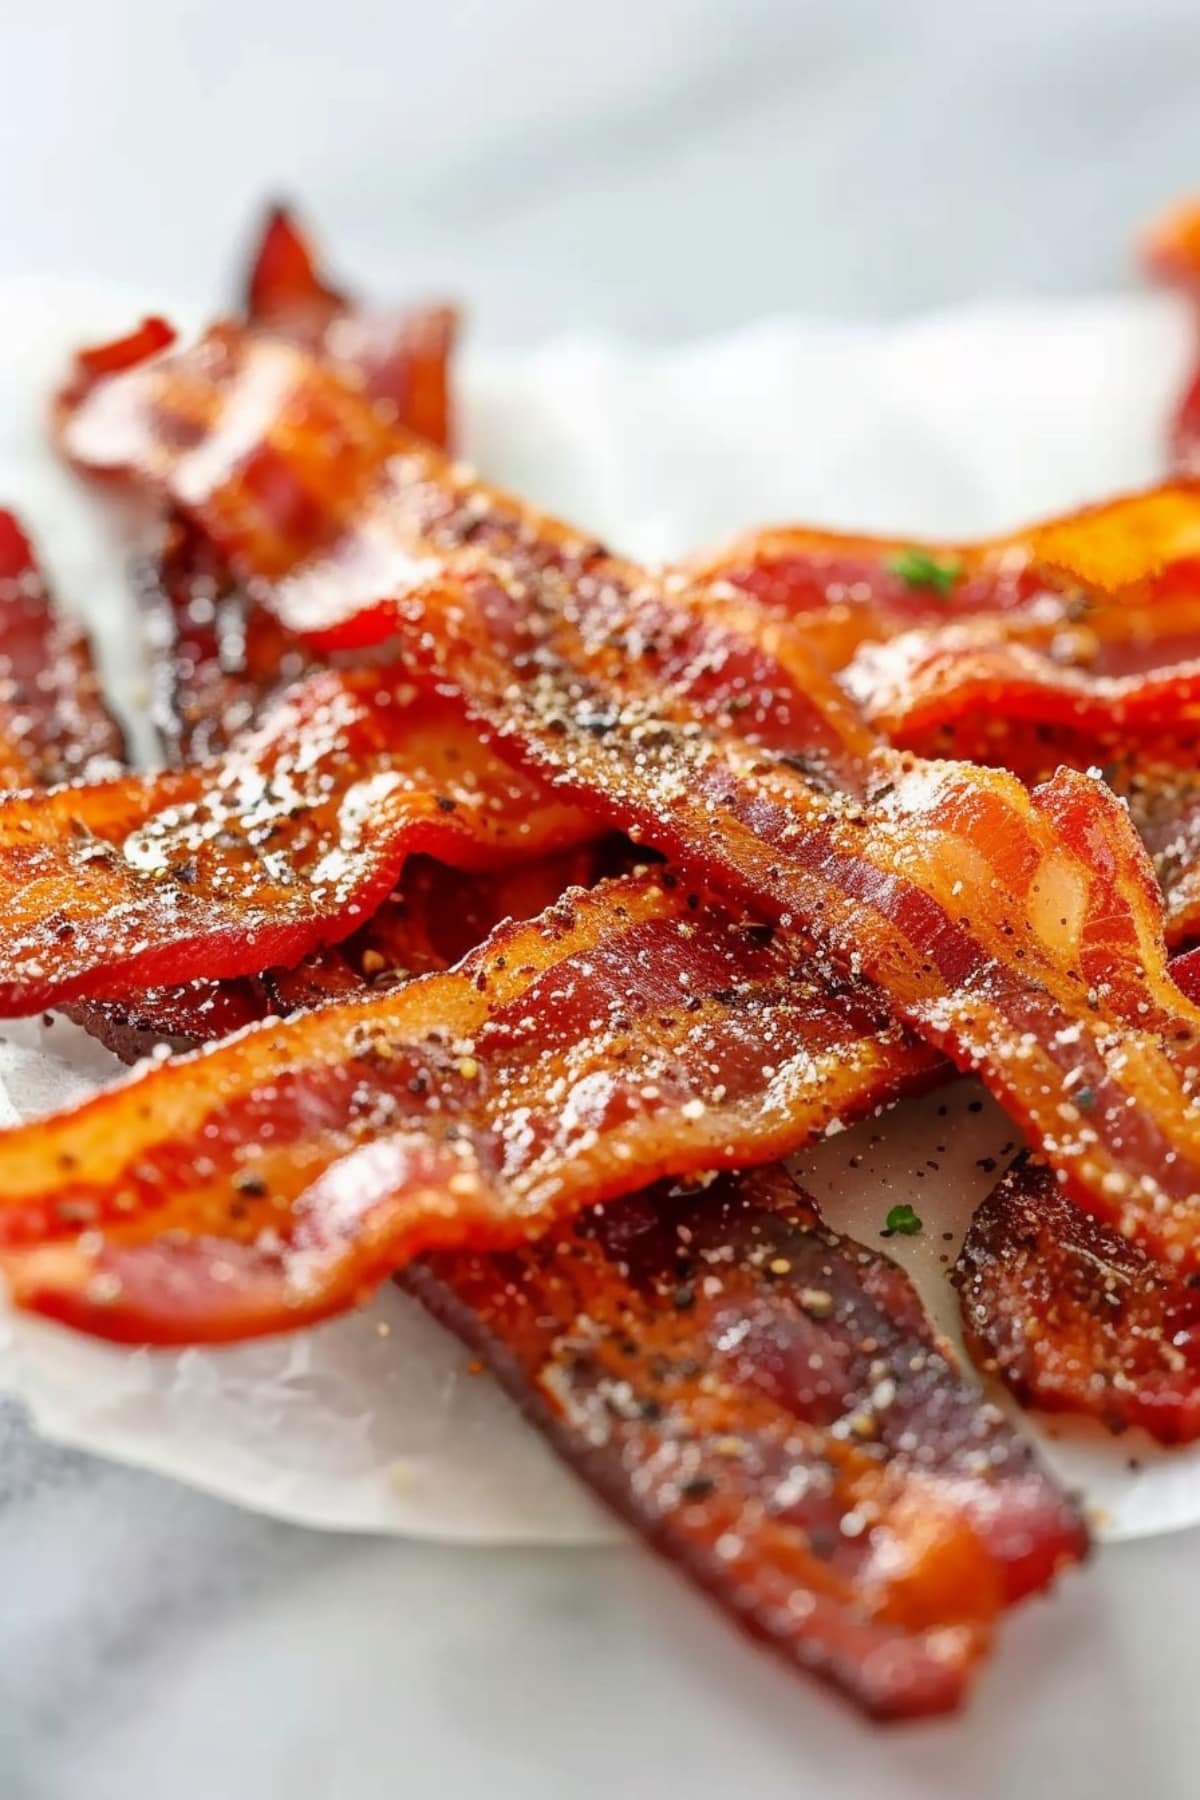 Homemade crispy bacon on a parchment paper, close up